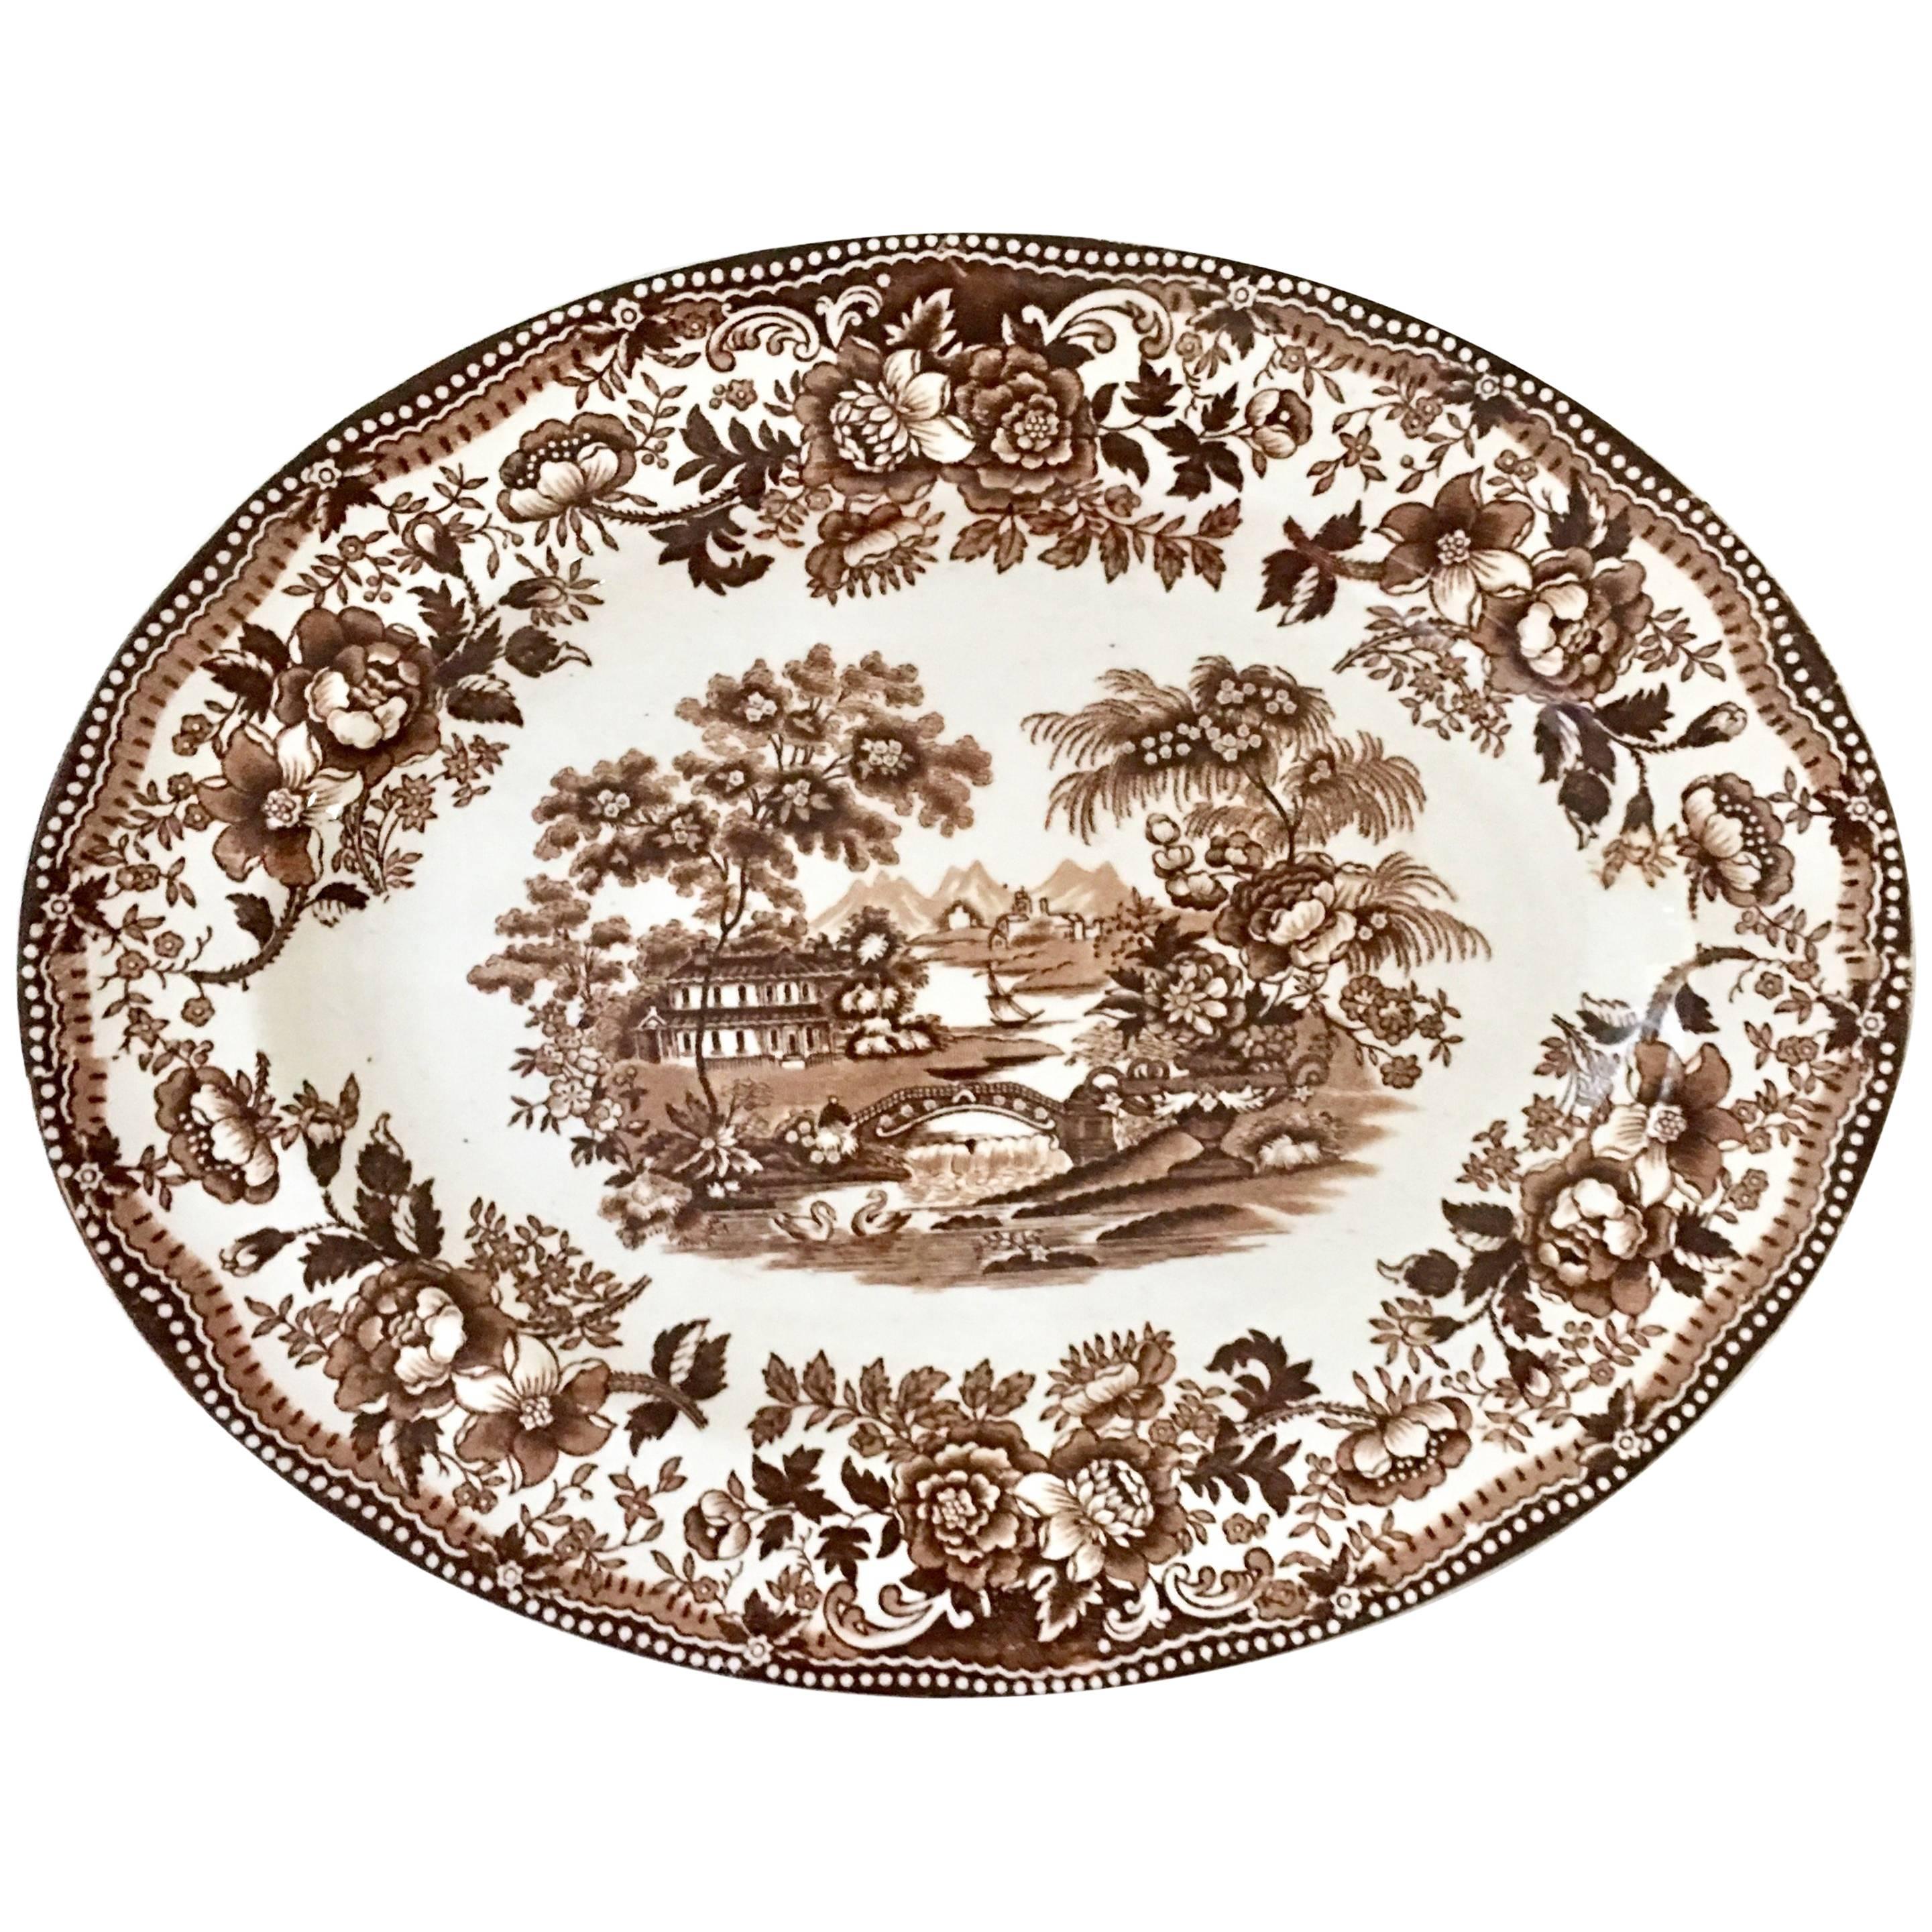 1940'S Staffordshire Ironstone Oval Serving Platter "Tonquin" By Alfred Meakin